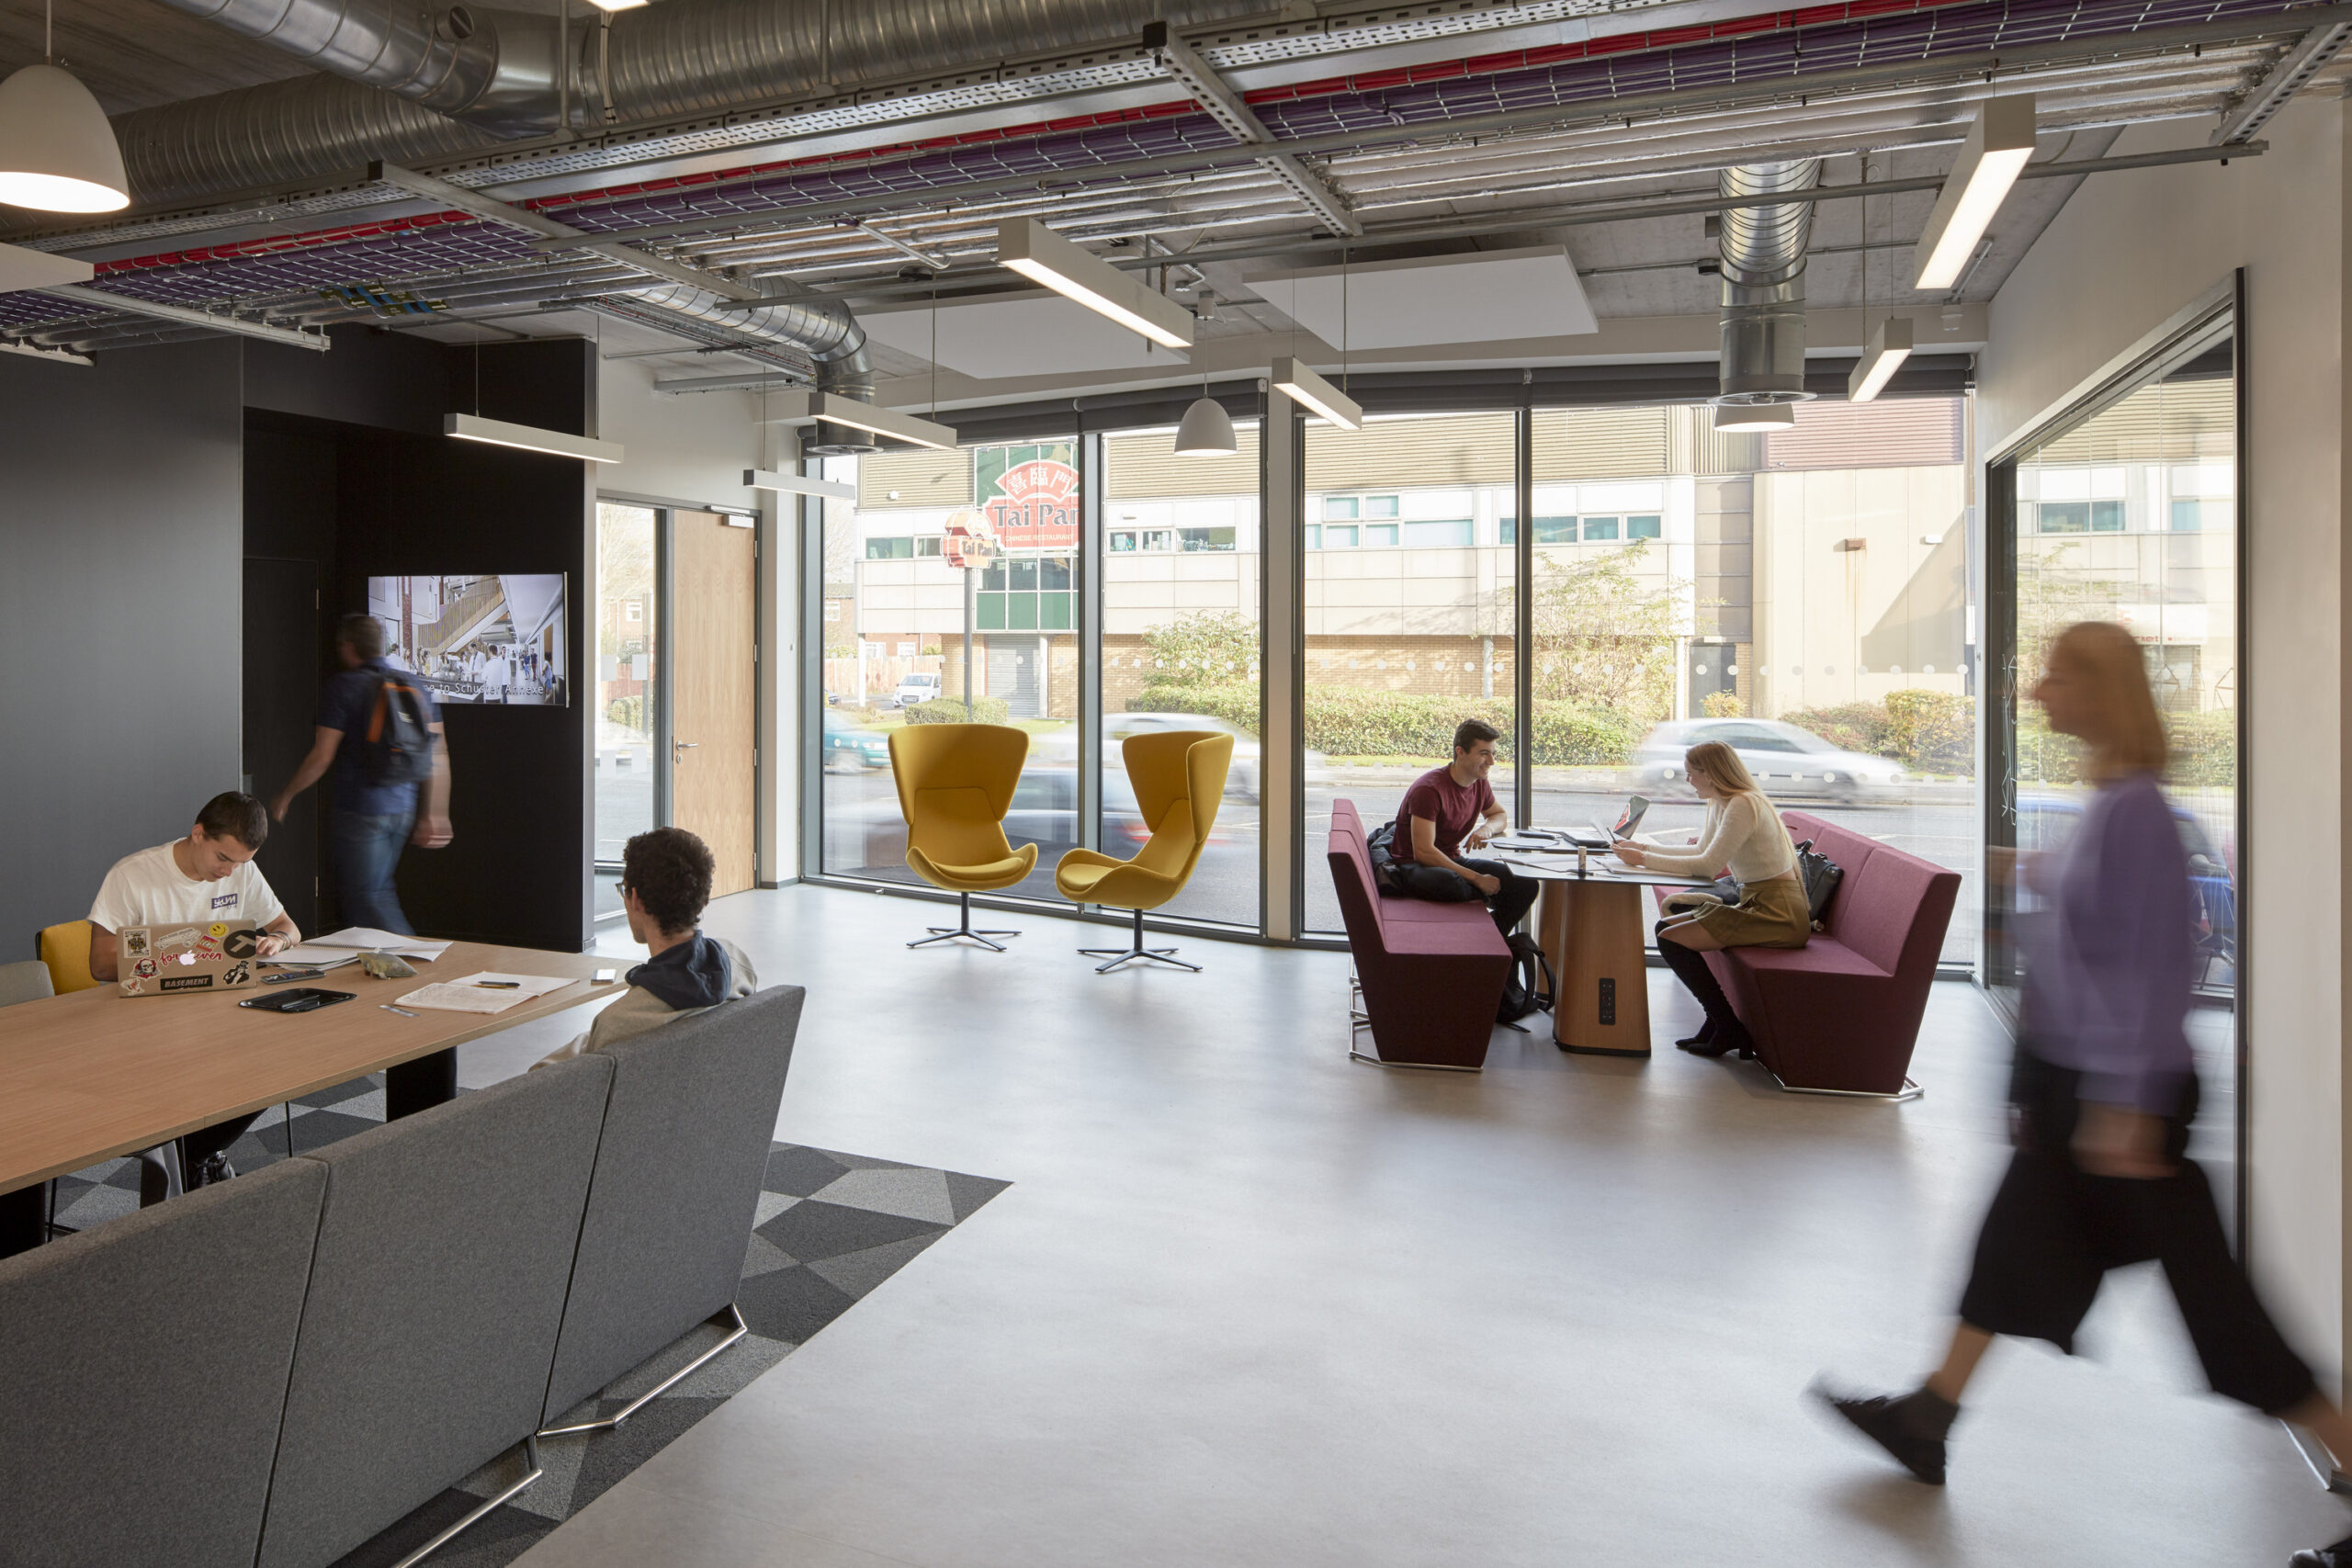 Interior social space at University of Manchester Schuster Annexe